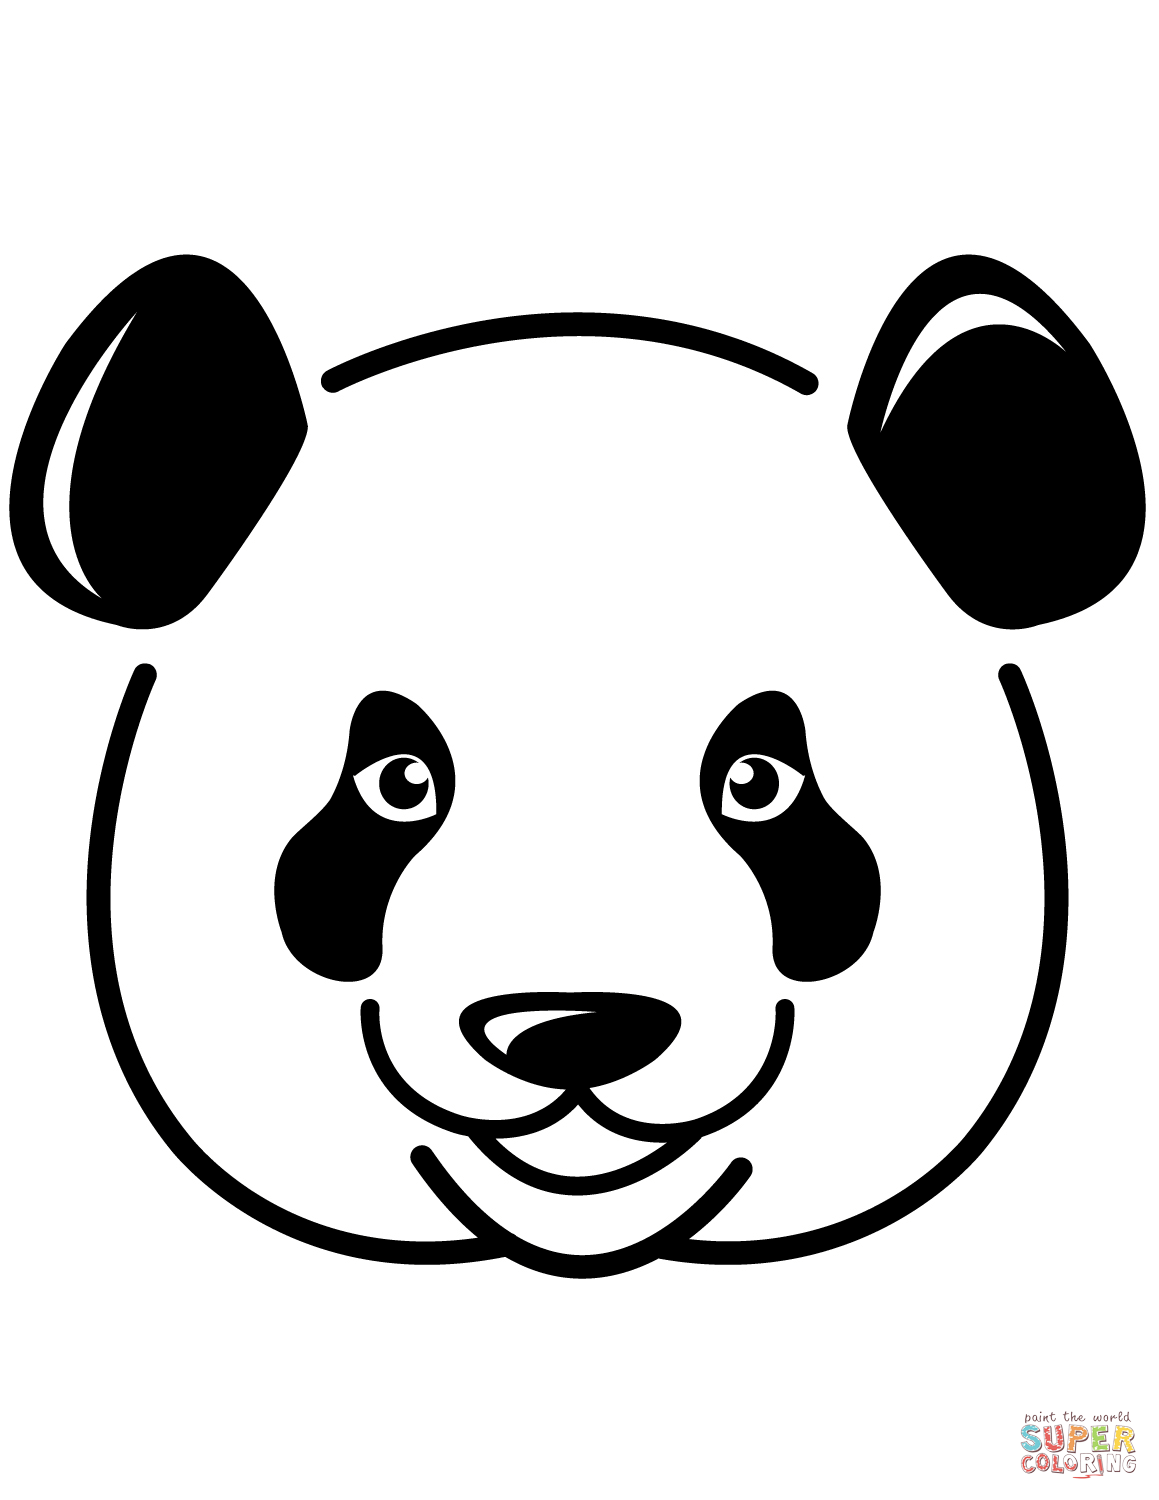 Pandas face coloring page free printable coloring pages